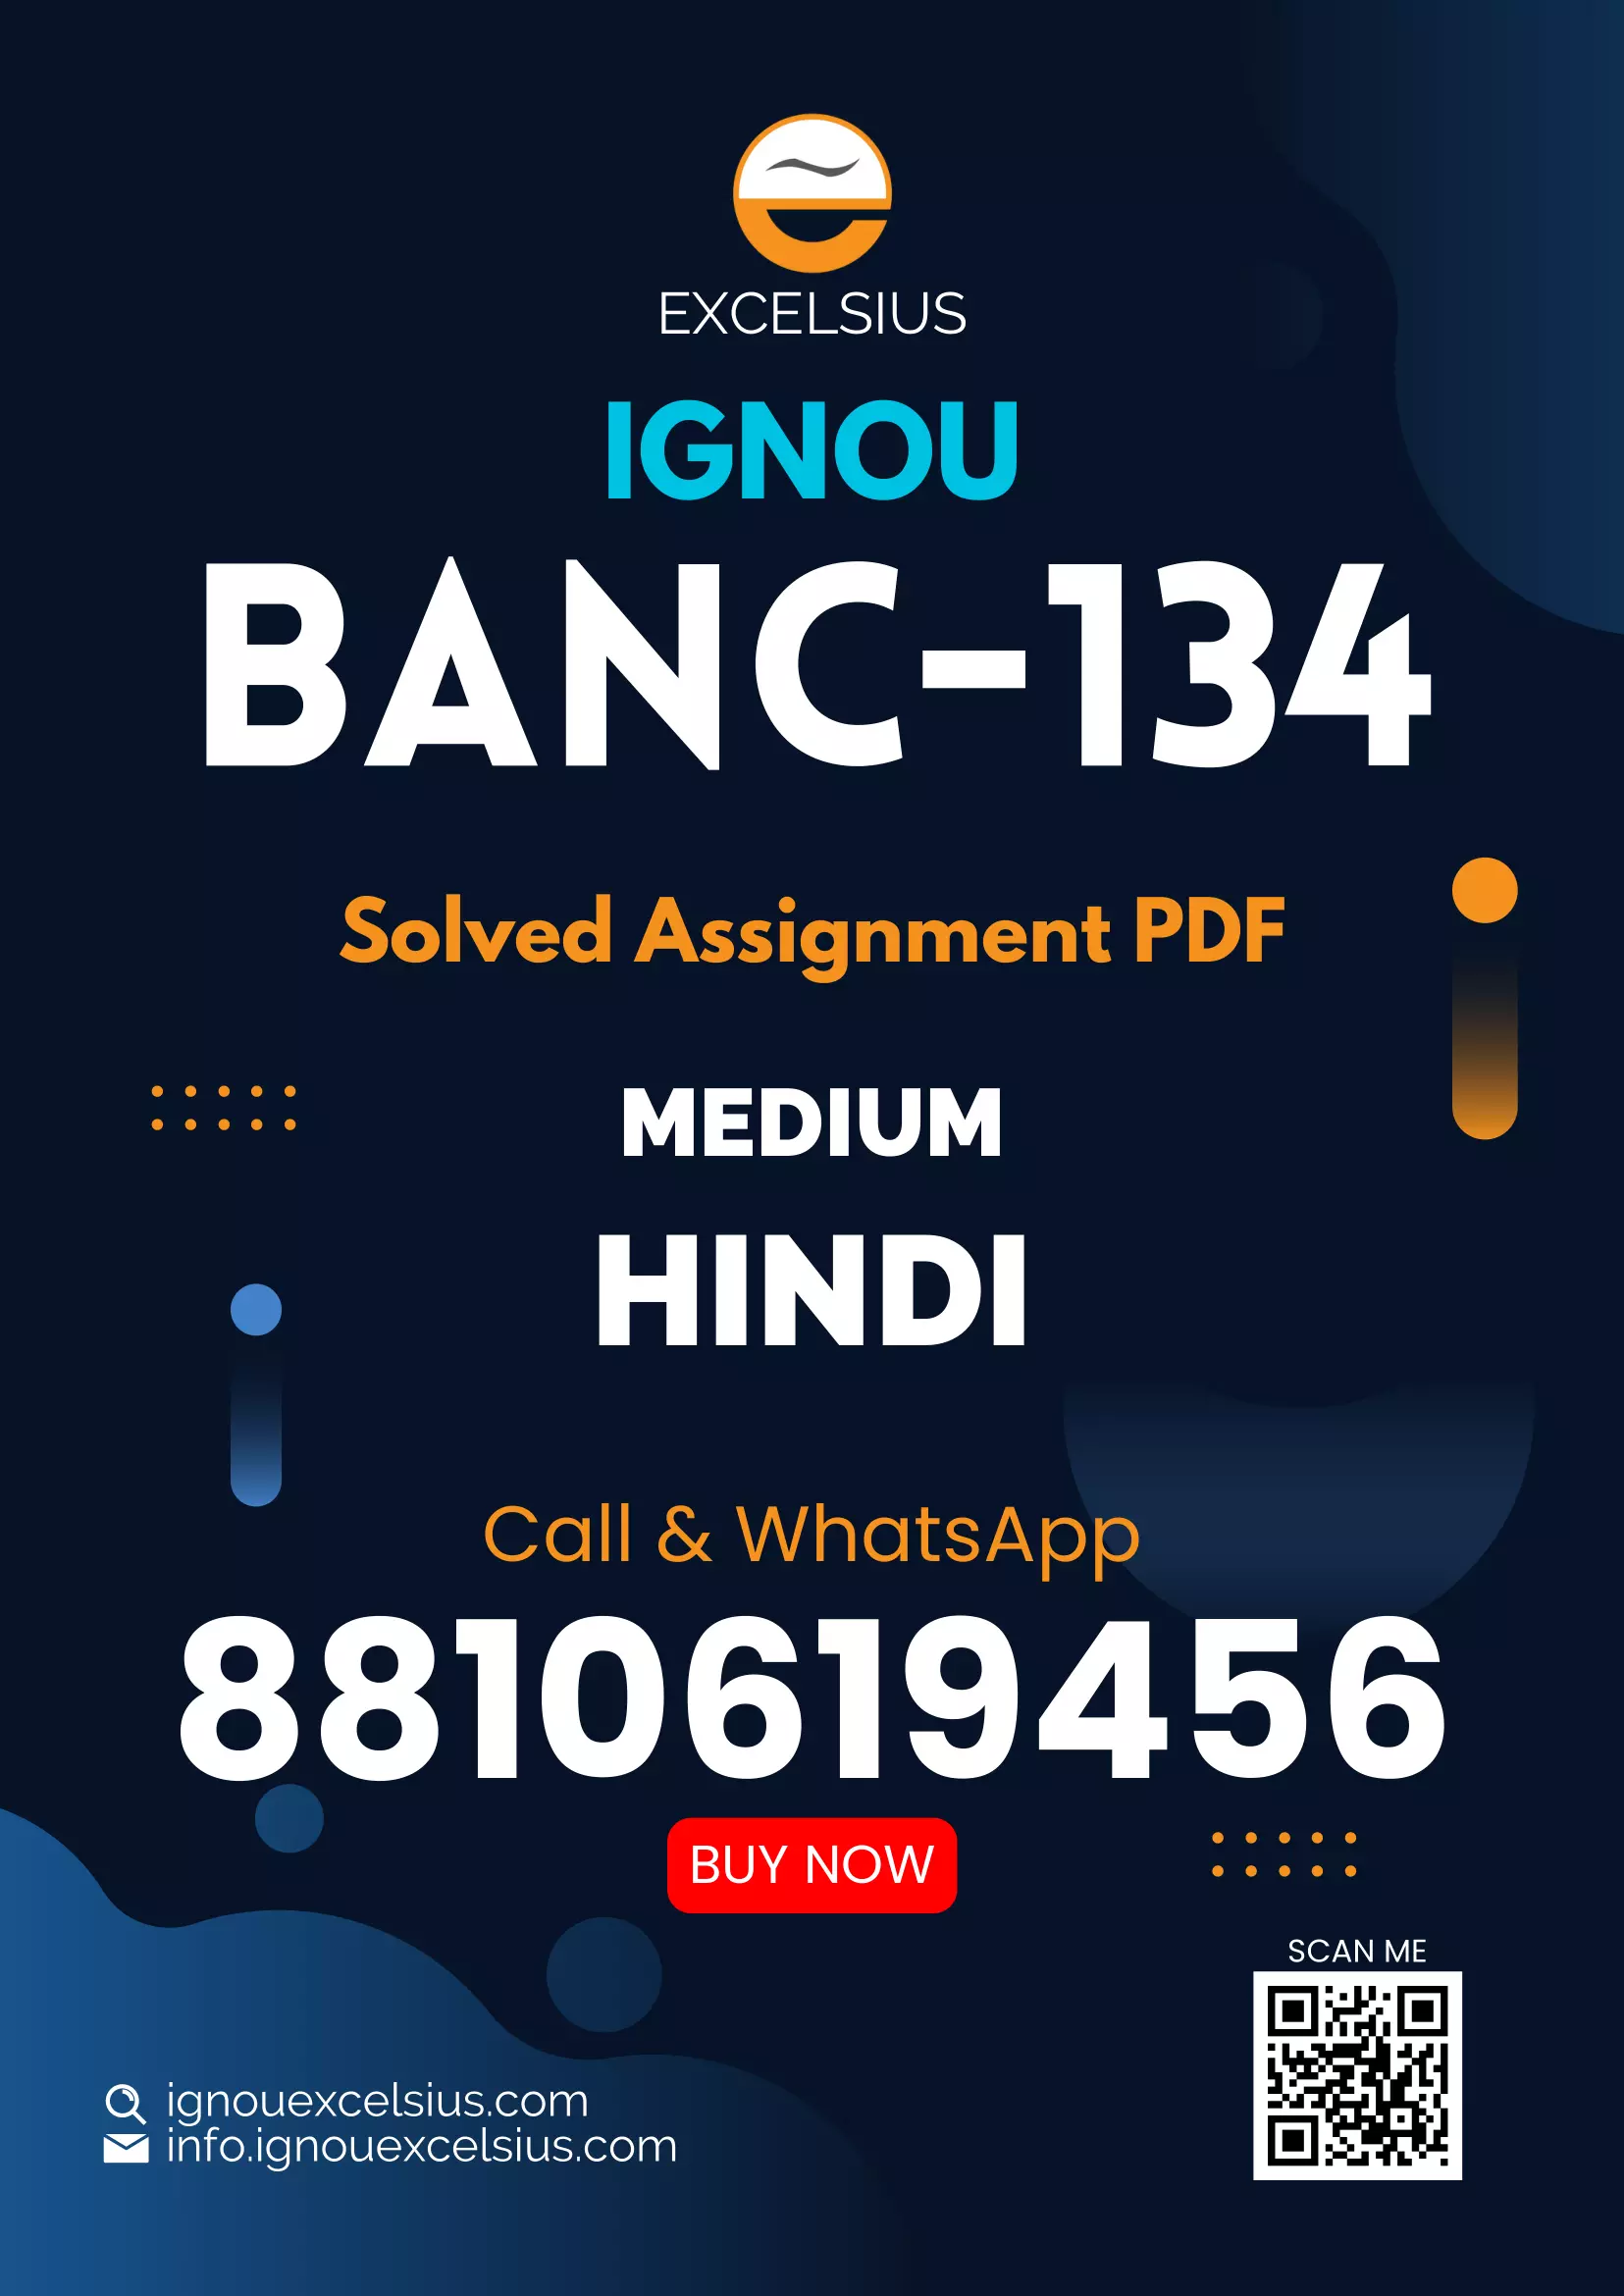 IGNOU BANC-134 - Fundamentals of Archaeological Anthropology, Latest Solved Assignment-July 2022 – January 2023